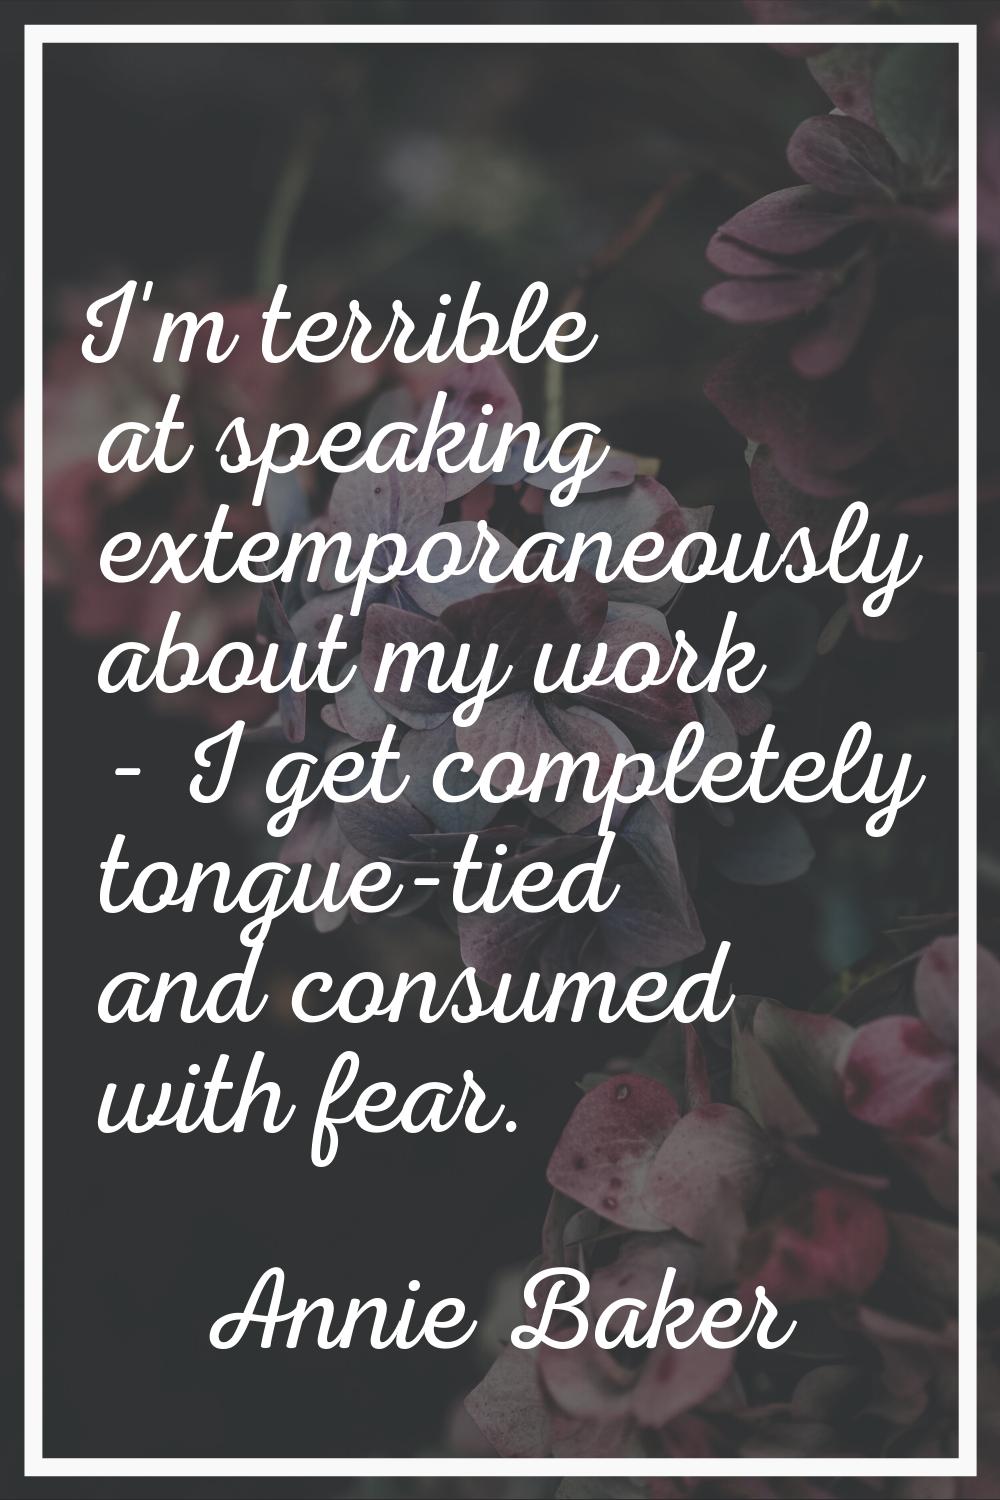 I'm terrible at speaking extemporaneously about my work - I get completely tongue-tied and consumed